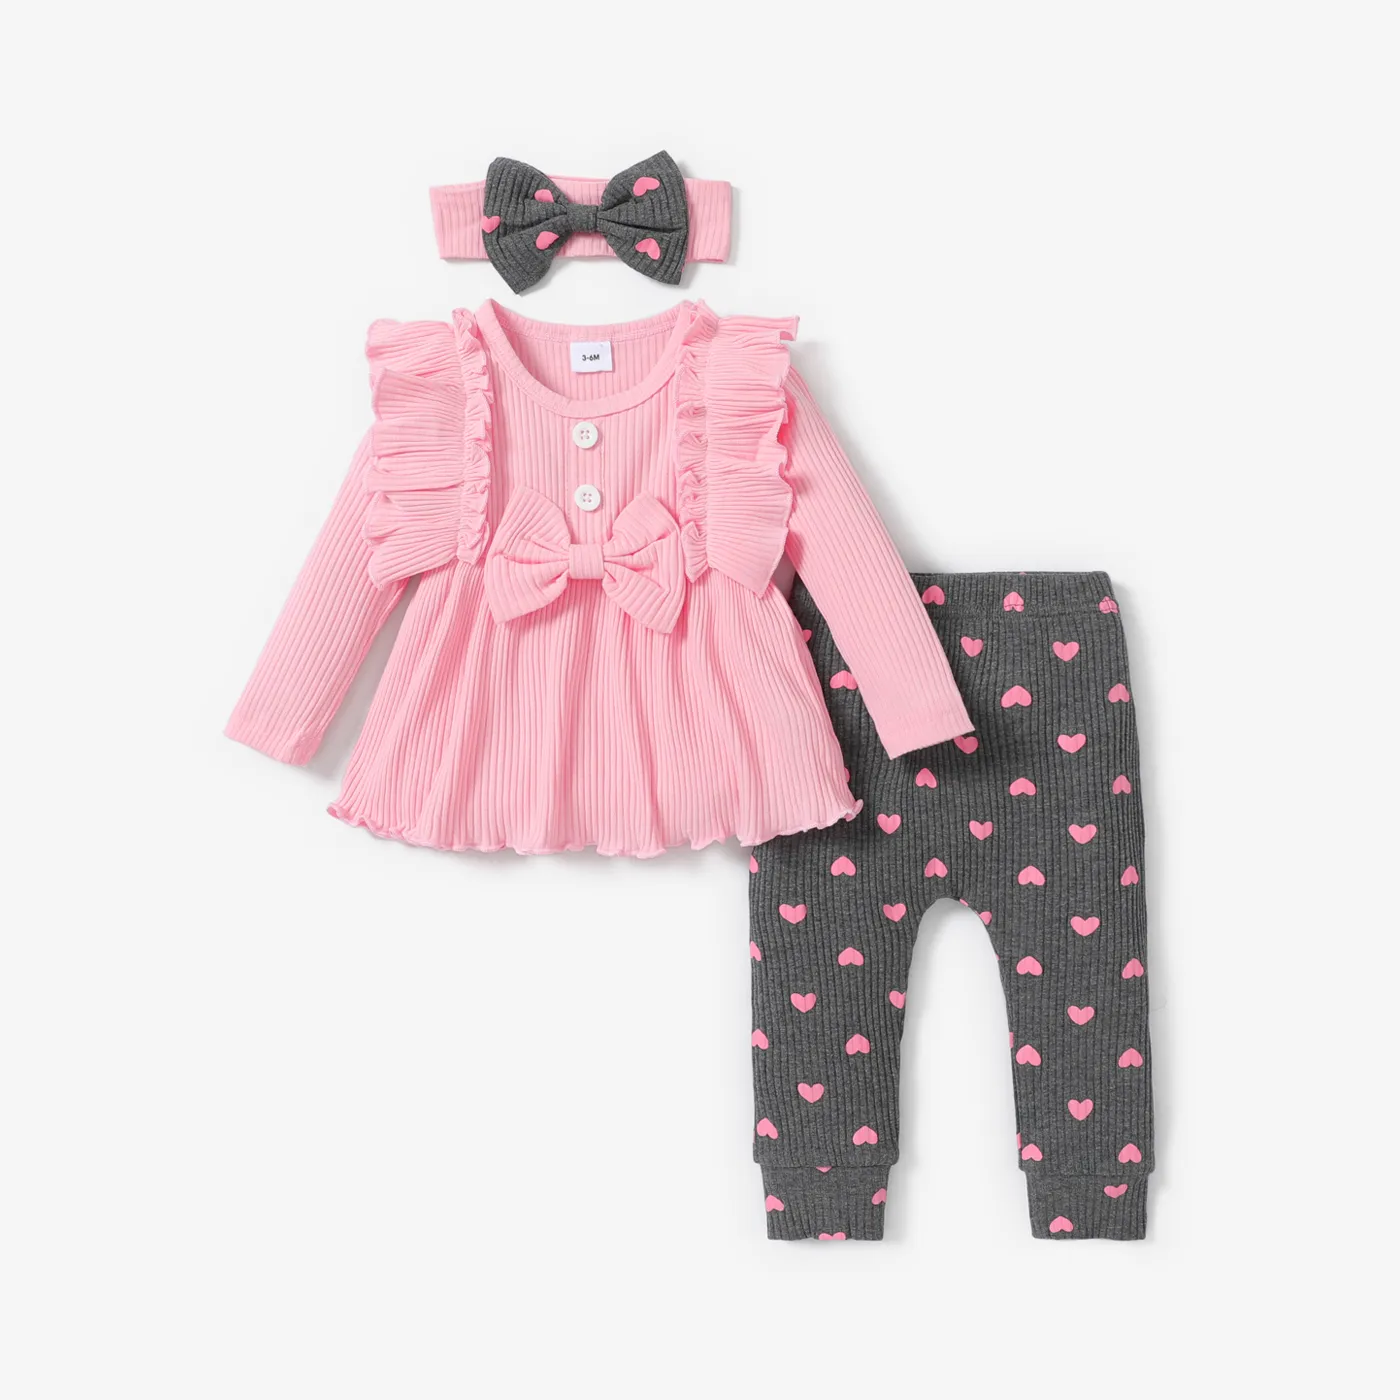 3pcs Baby Girl 95% Cotton Rib Knit Ruffle Trim Bow Front Long-sleeve Top and Allover Heart Print Leg